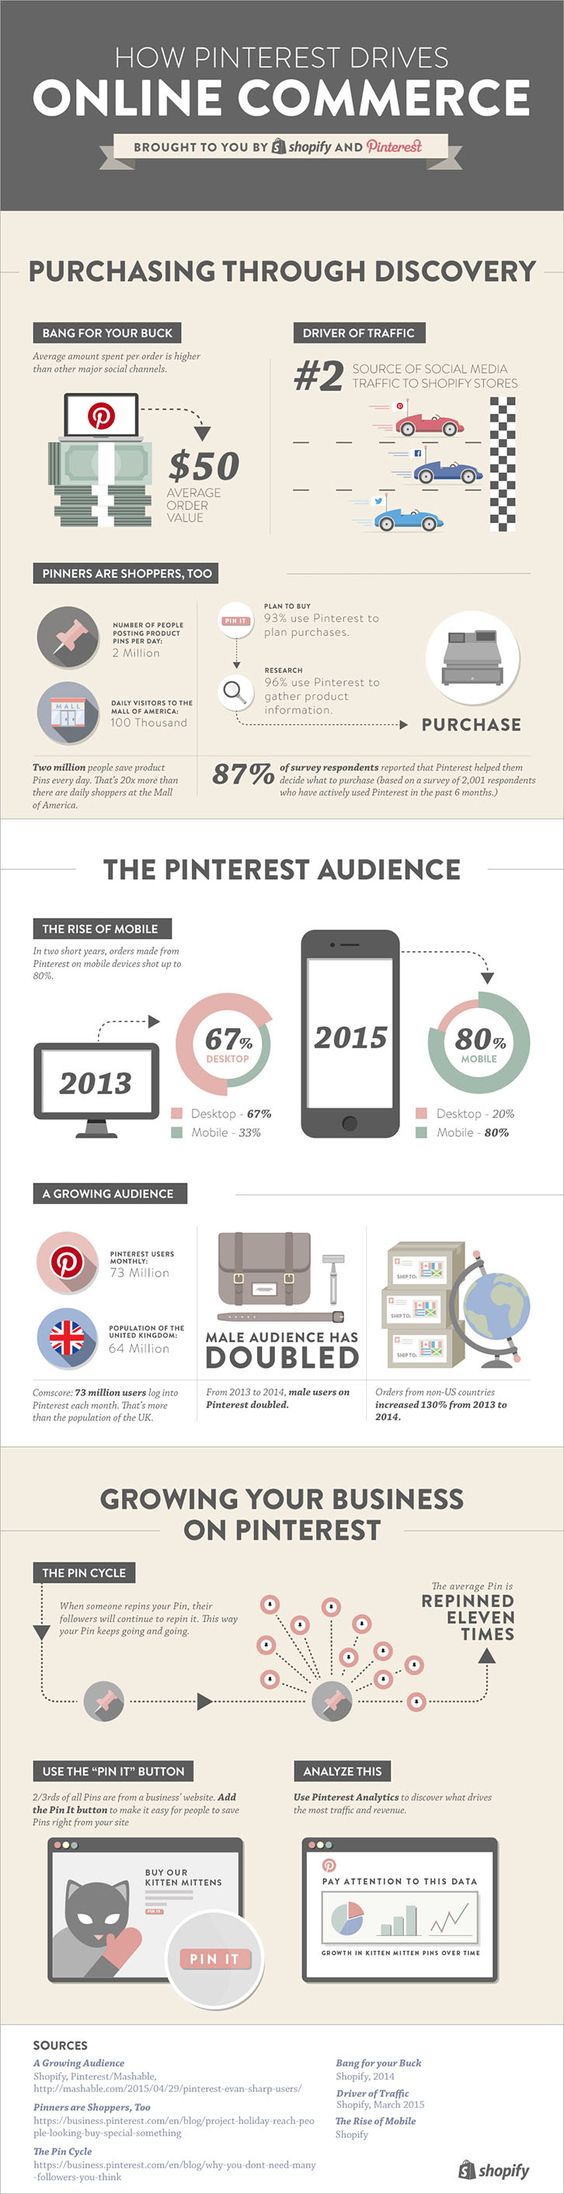 How Pinterest Drives Online Commerce [Infographic] — Ecommerce Marketing Blog - Ecommerce News, Online Store Tips & More by Shopify